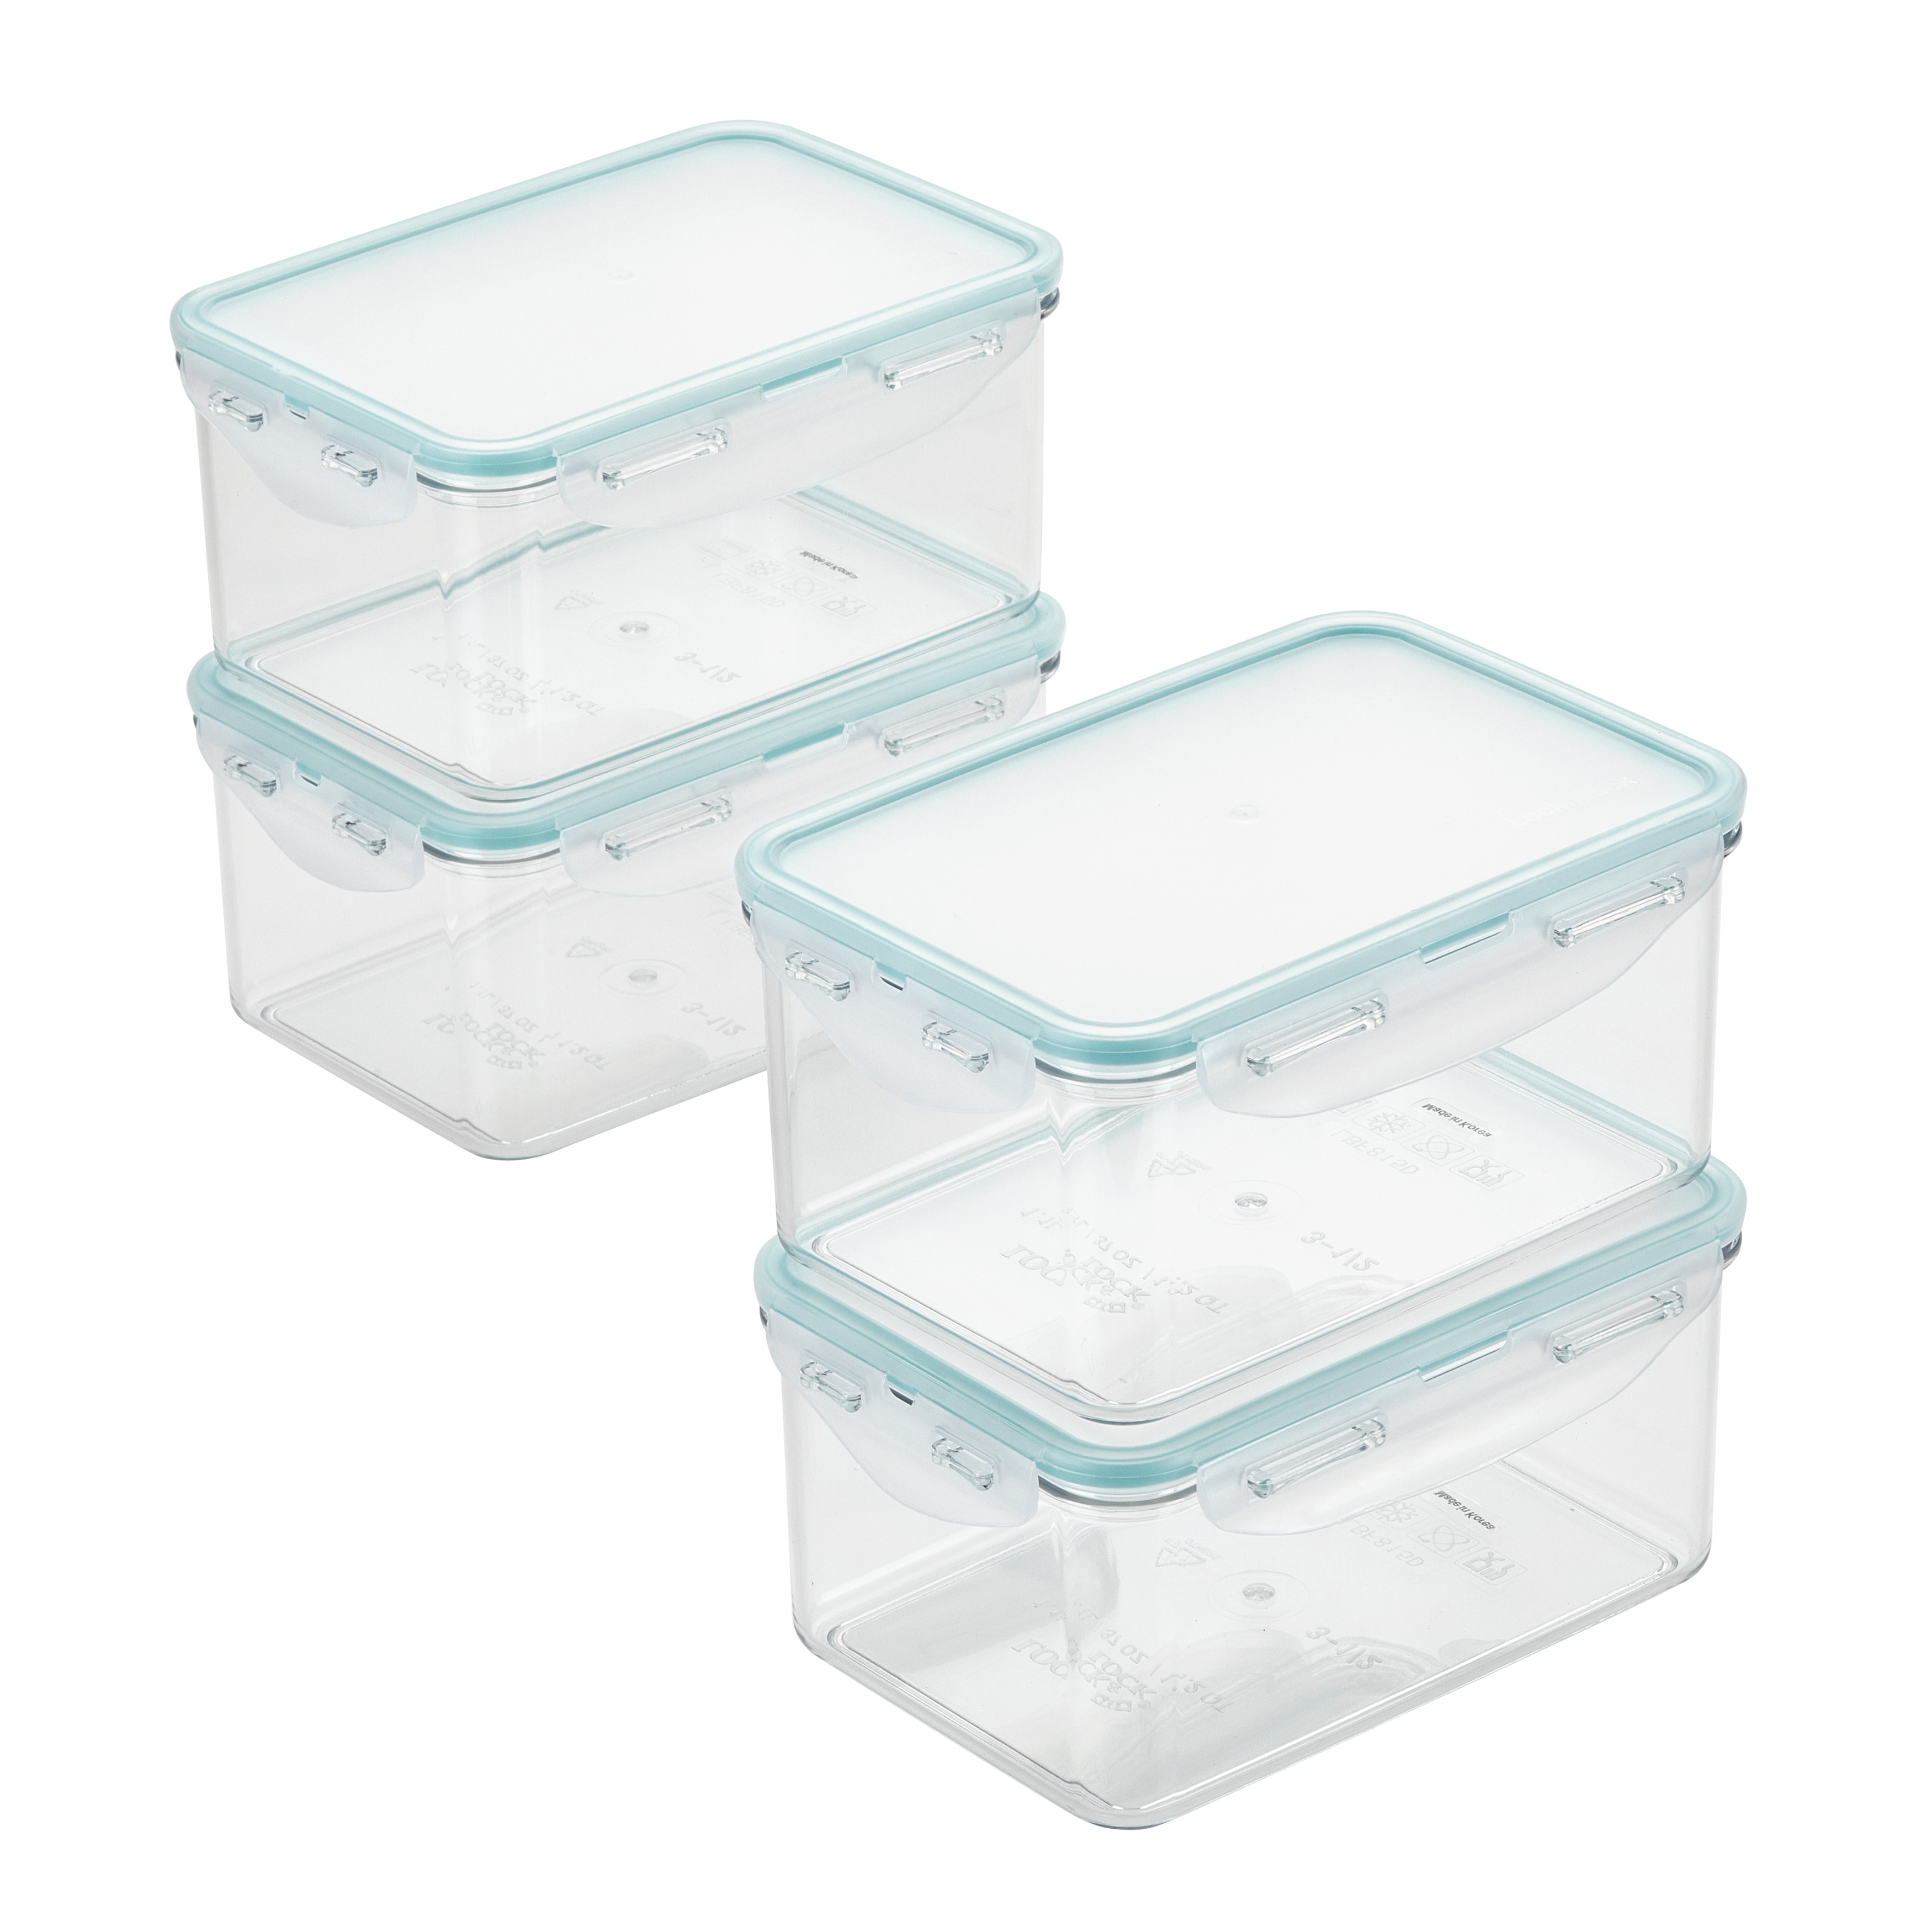 https://ak1.ostkcdn.com/images/products/is/images/direct/28acd33b2bb8964d96a29b479ab603c8066c681e/LocknLock-Purely-Better-Rectangular-Food-Storage-Containers%2C-37-Ounce%2C-Set-of-4.jpg